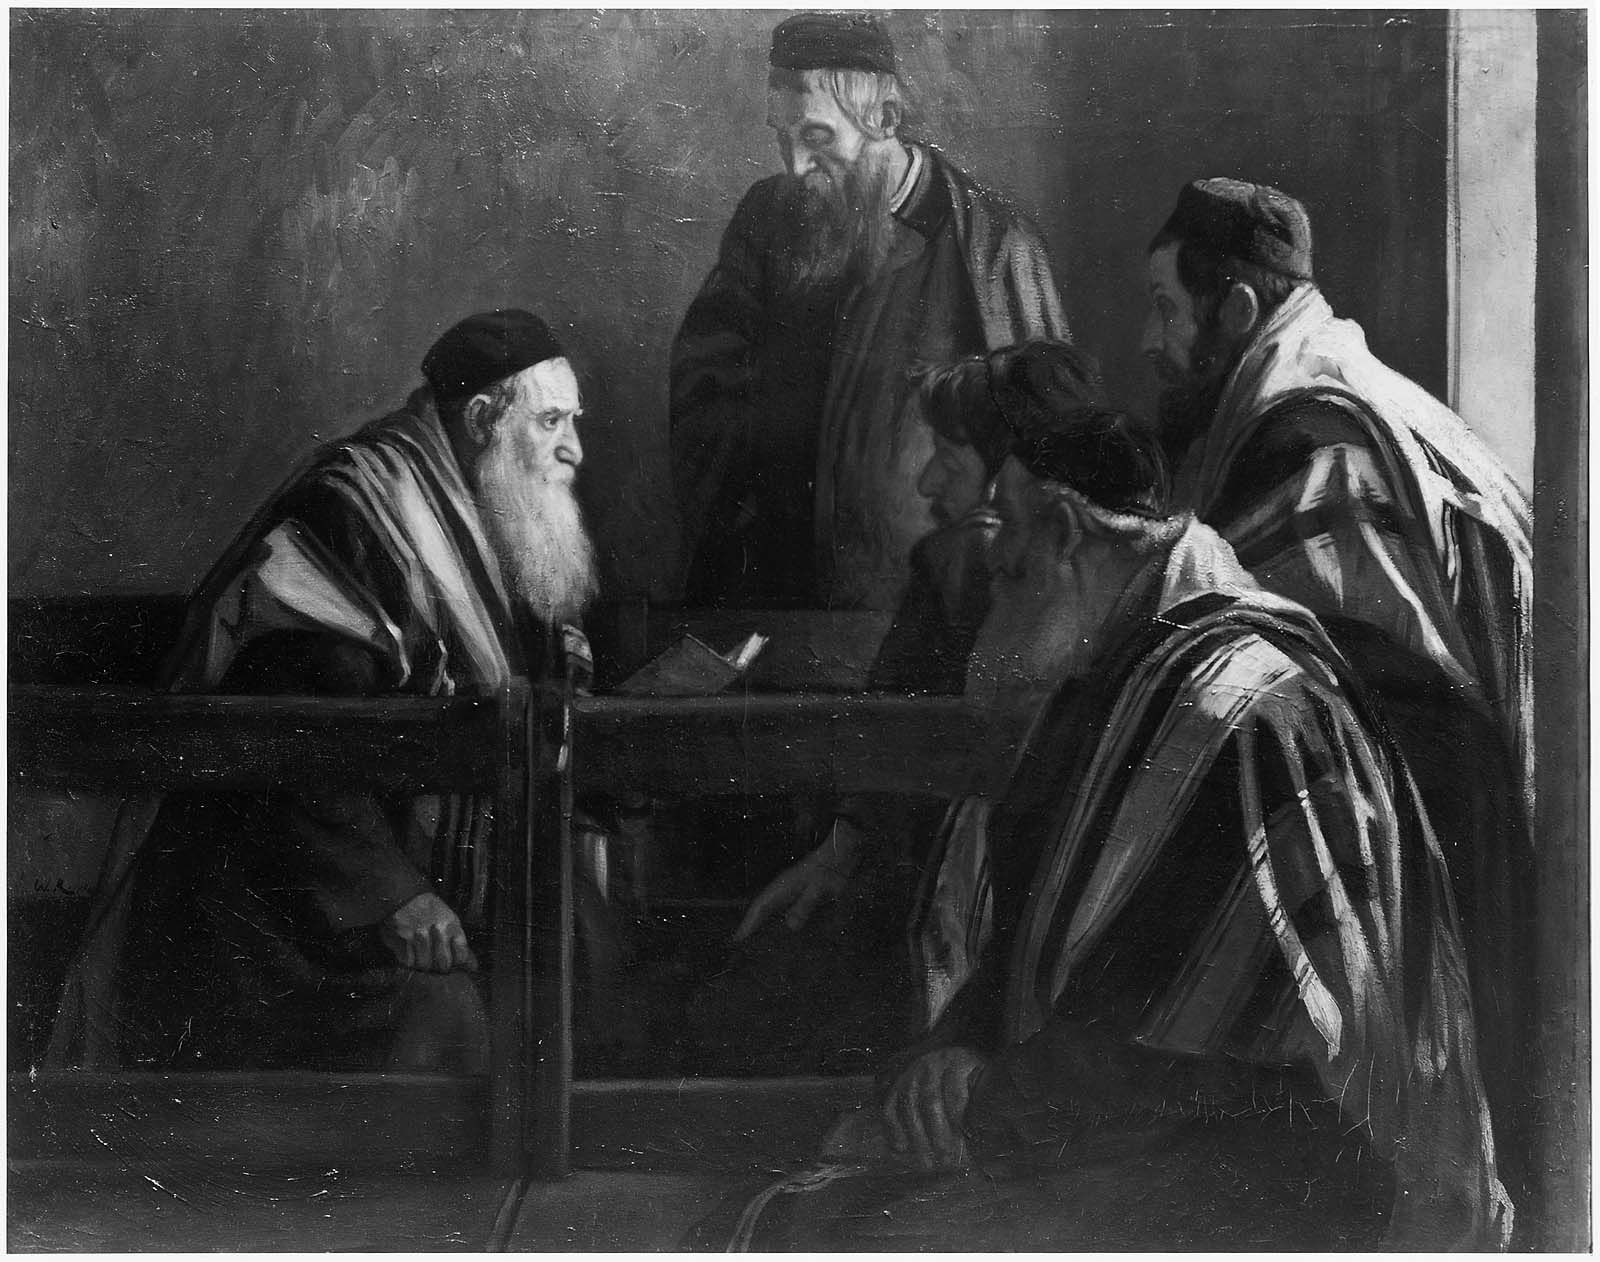 Exposition of the Talmud